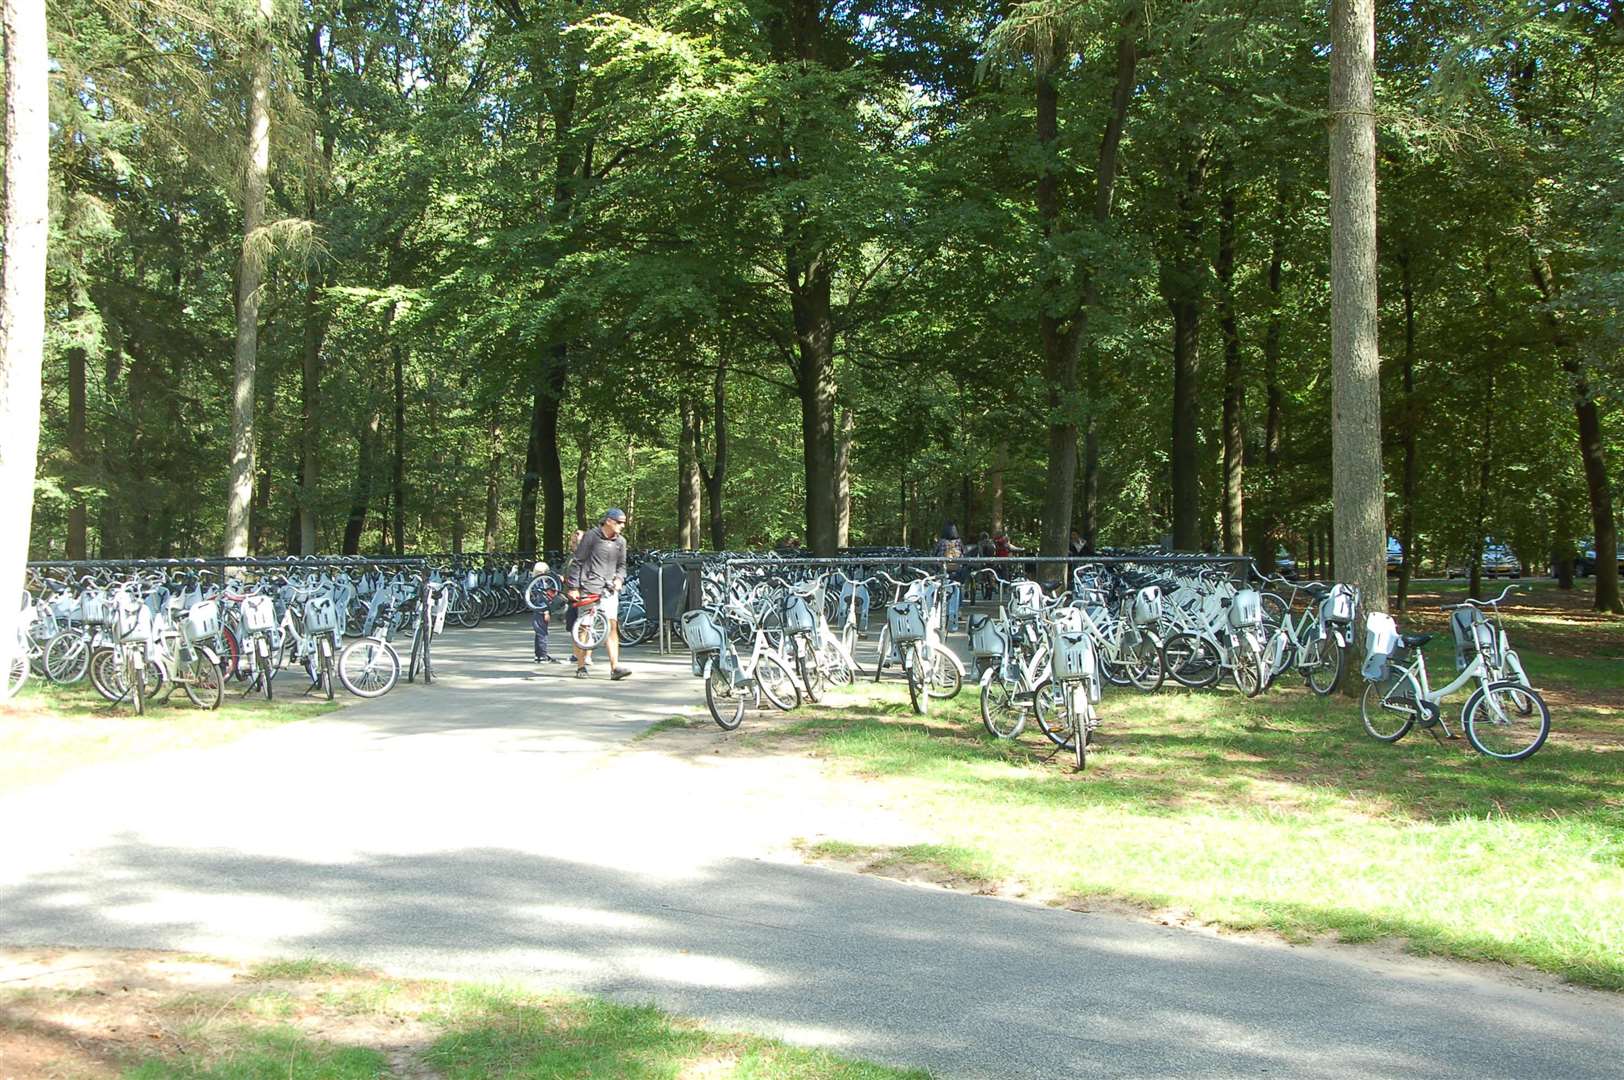 The free-to-use bicycles at one of the entrances to the Museum in the woods.